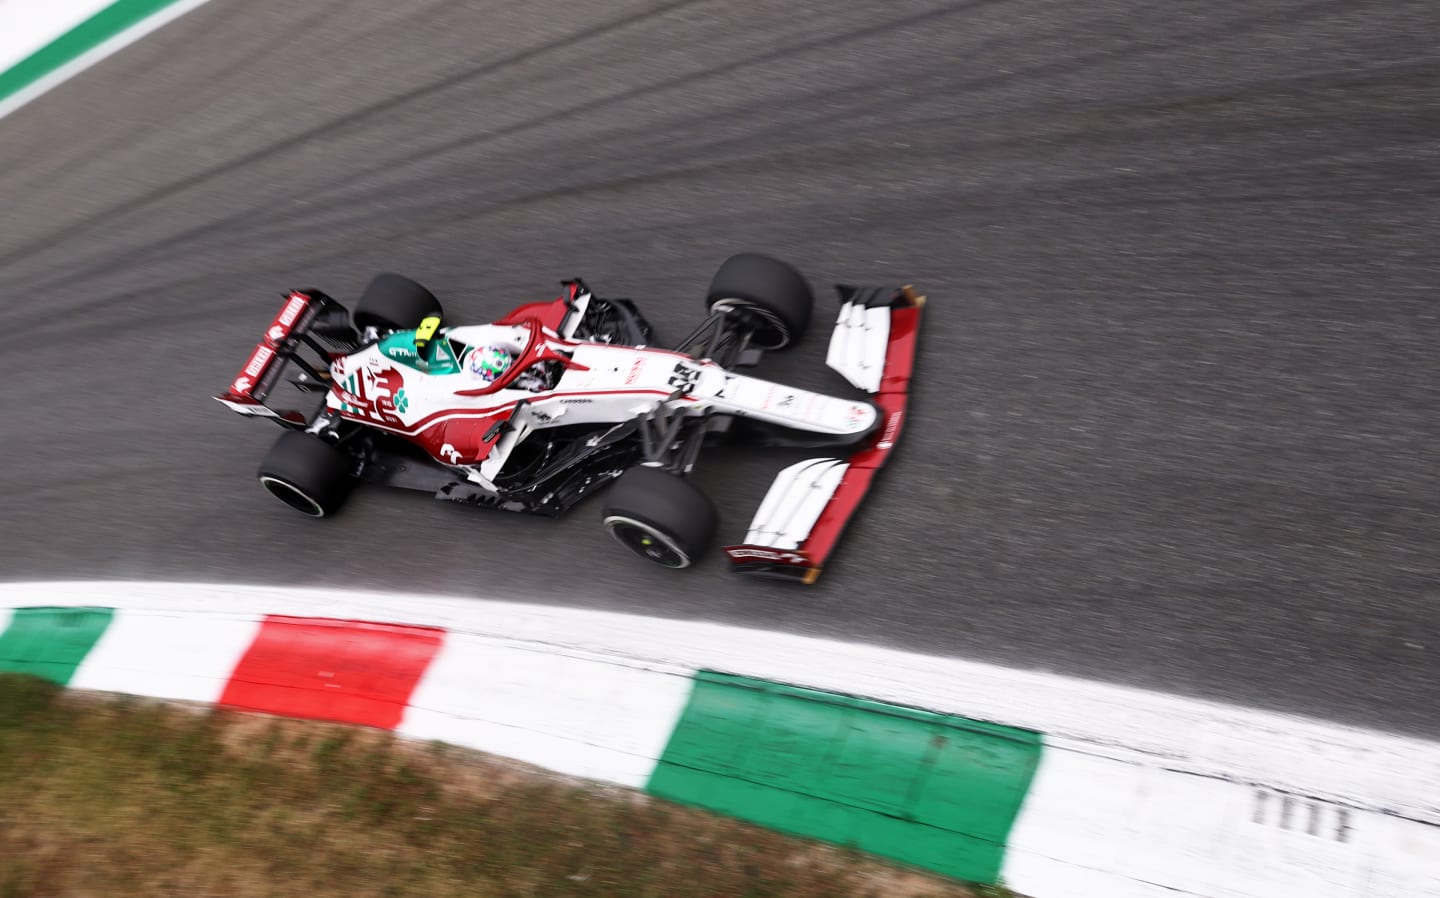 MONZA, ITALY - SEPTEMBER 10: Antonio Giovinazzi of Italy driving the (99) Alfa Romeo Racing C41 Ferrari during practice ahead of the F1 Grand Prix of Italy at Autodromo di Monza on September 10, 2021 in Monza, Italy. (Photo by Lars Baron/Getty Images)